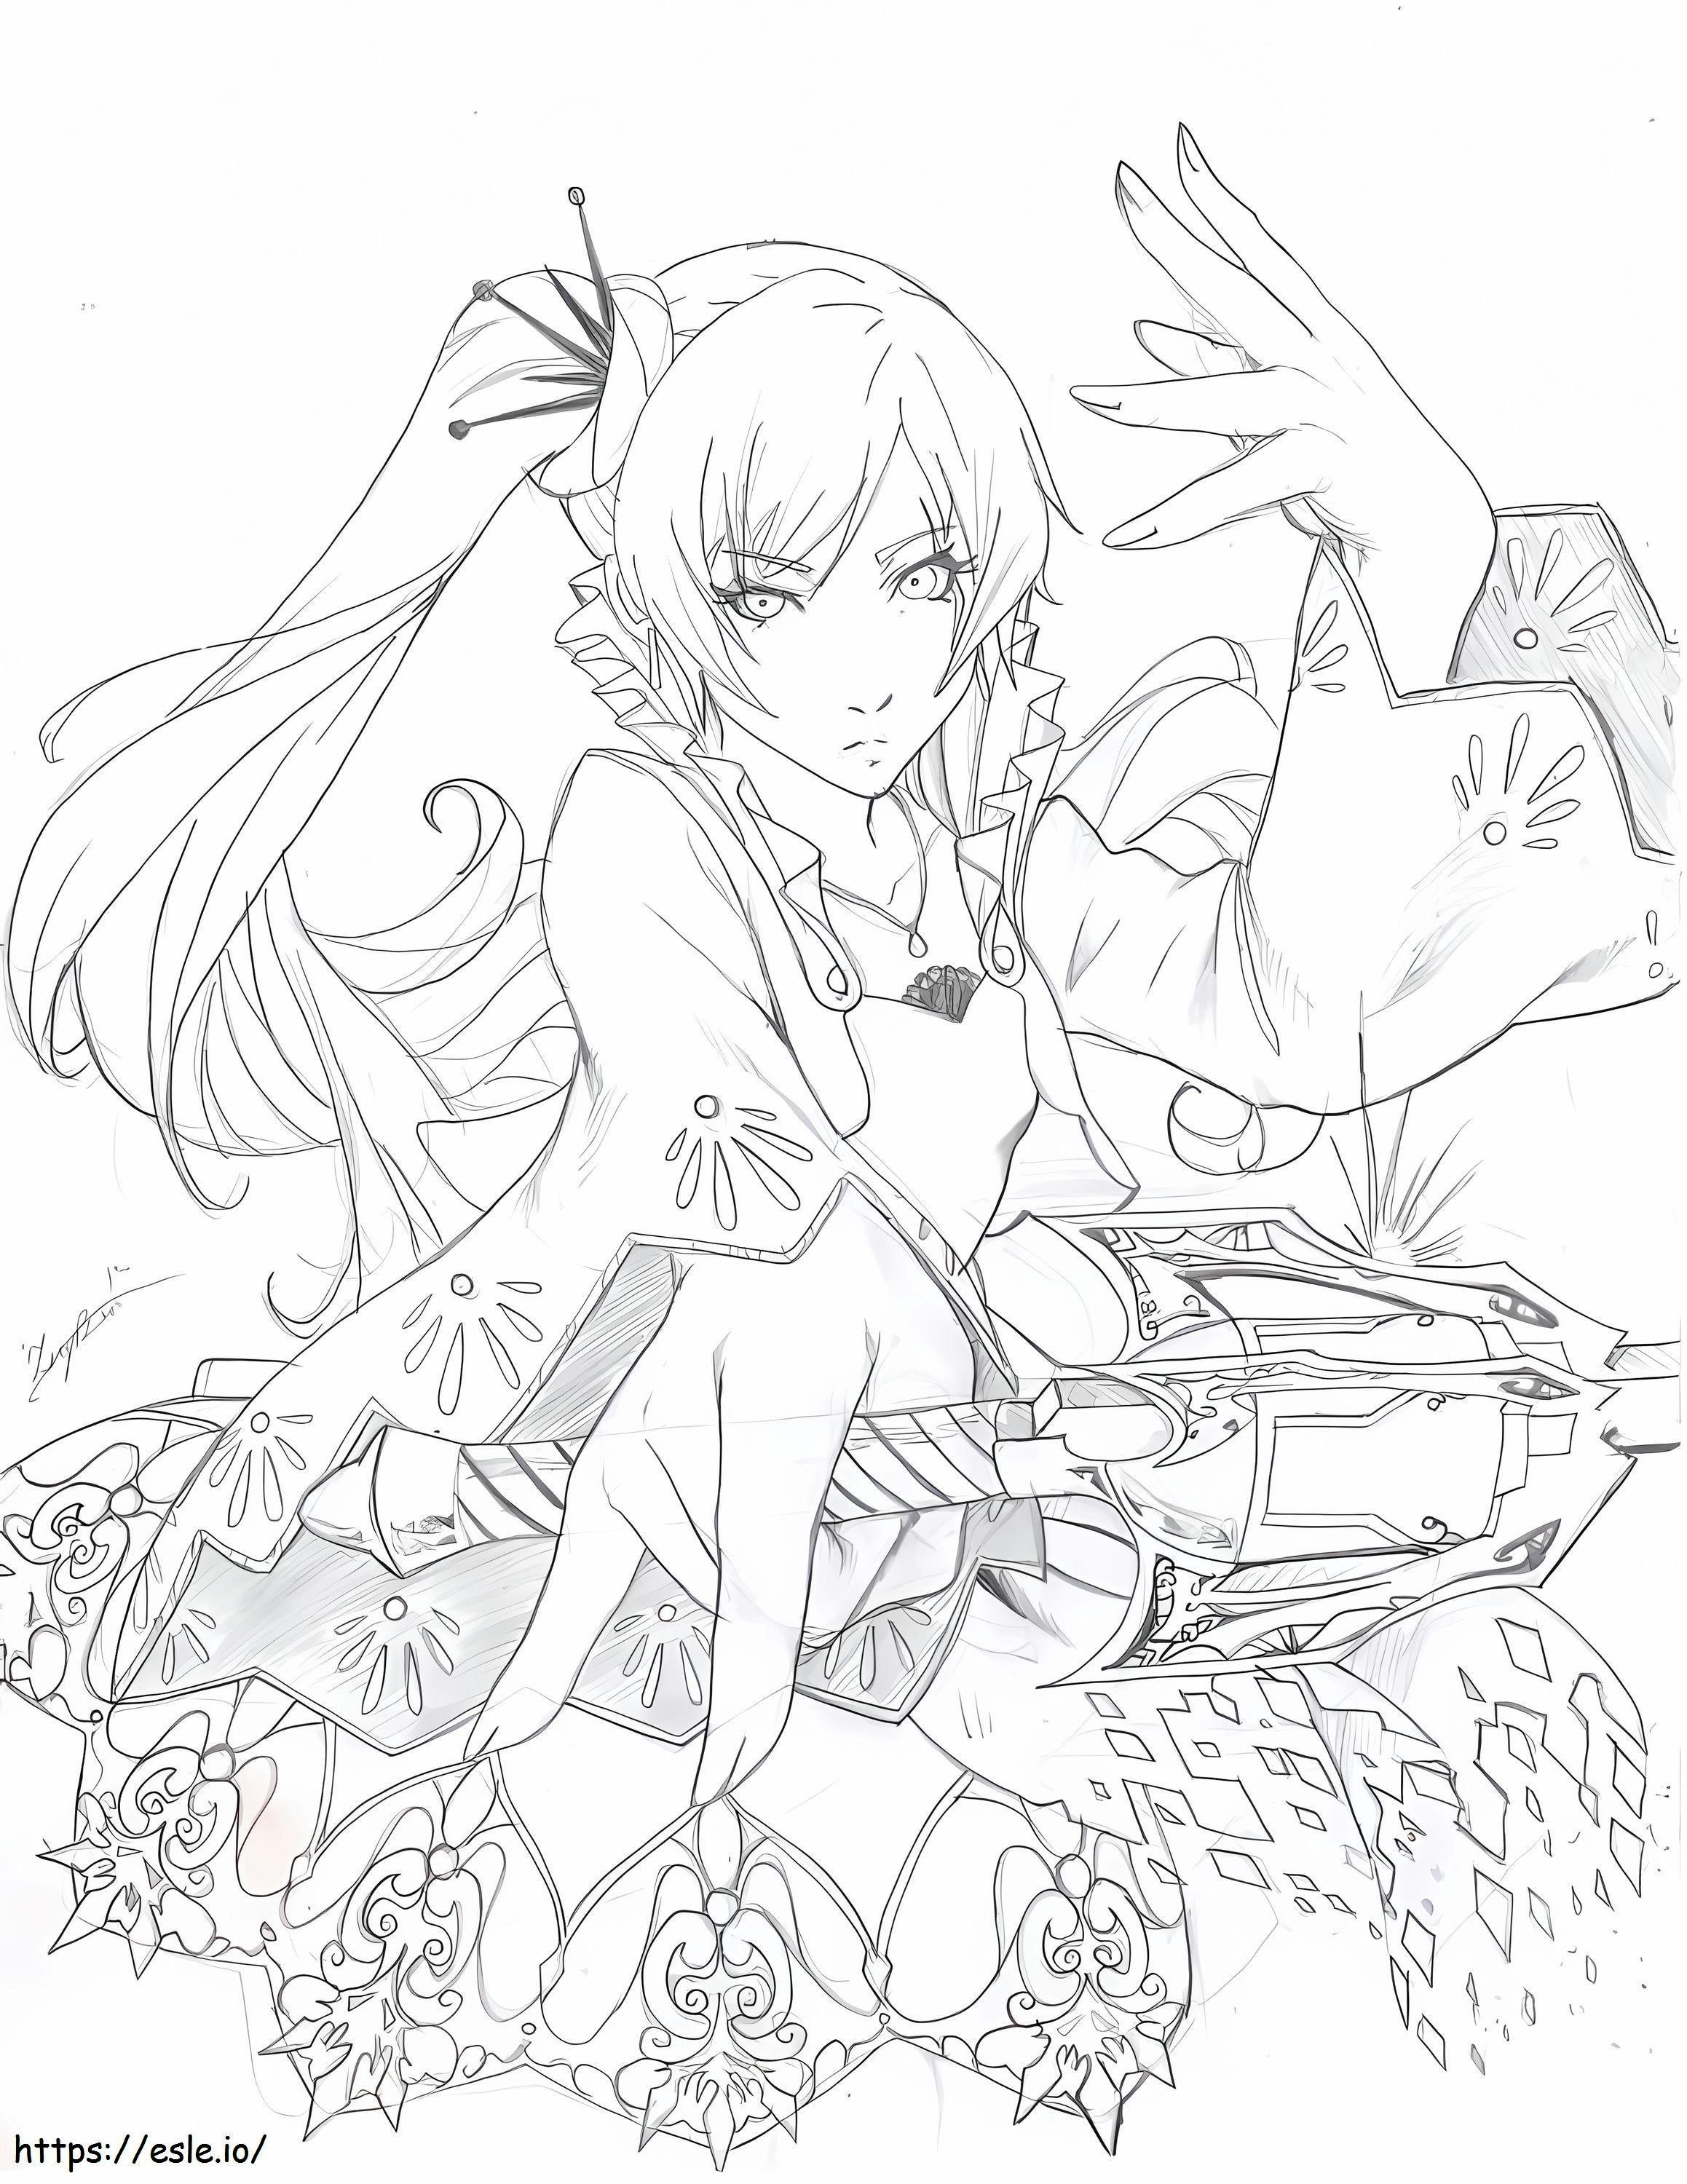 Cool RWBY coloring page